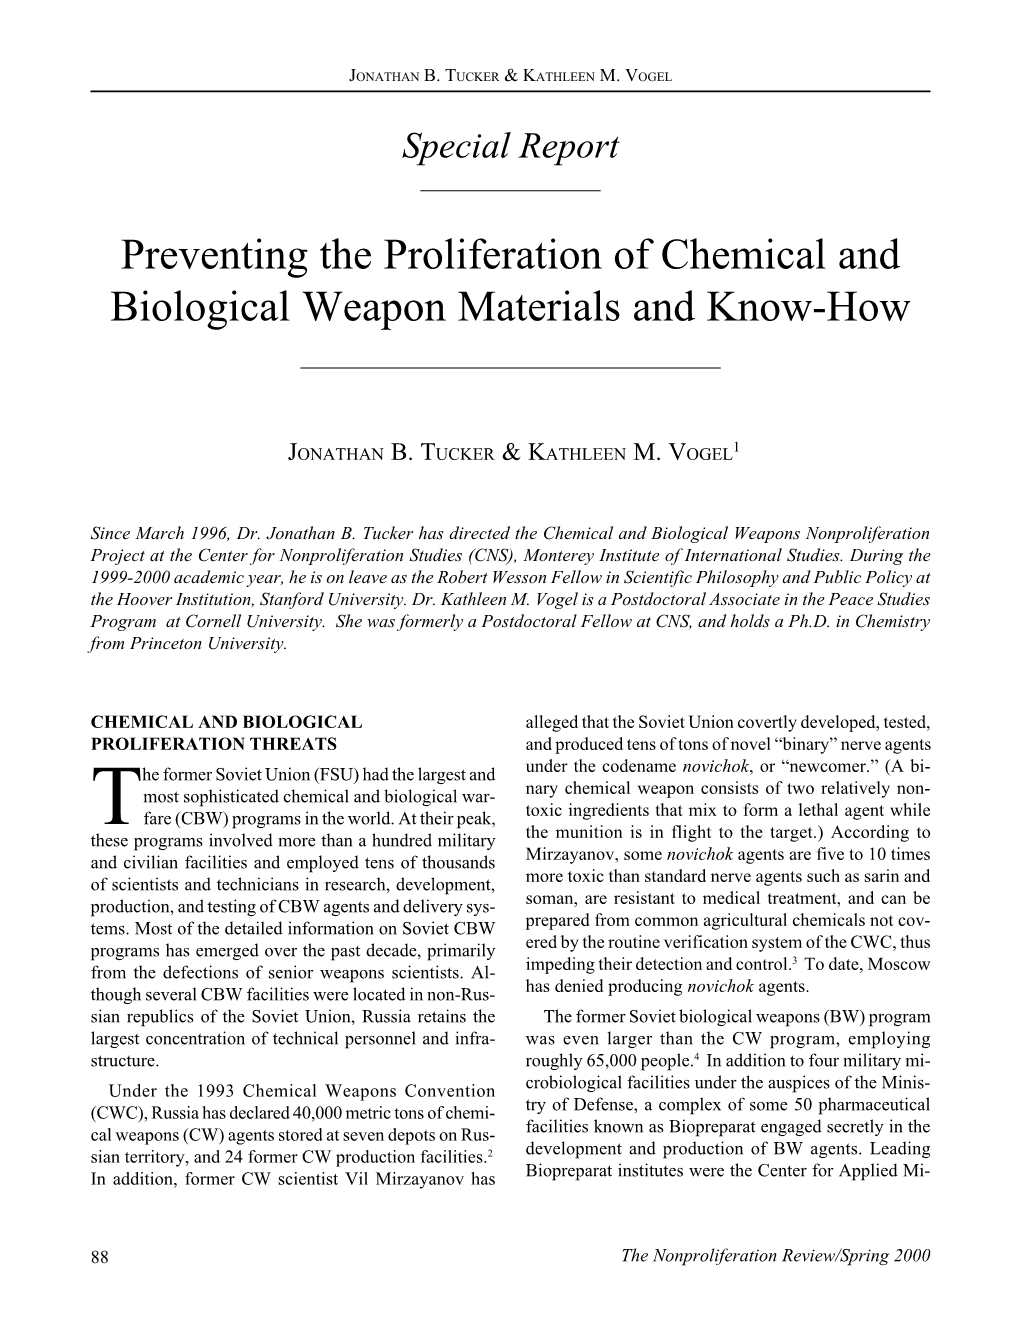 NPR 7.1: Preventing the Proliferation of Chemical and Biological Weapon